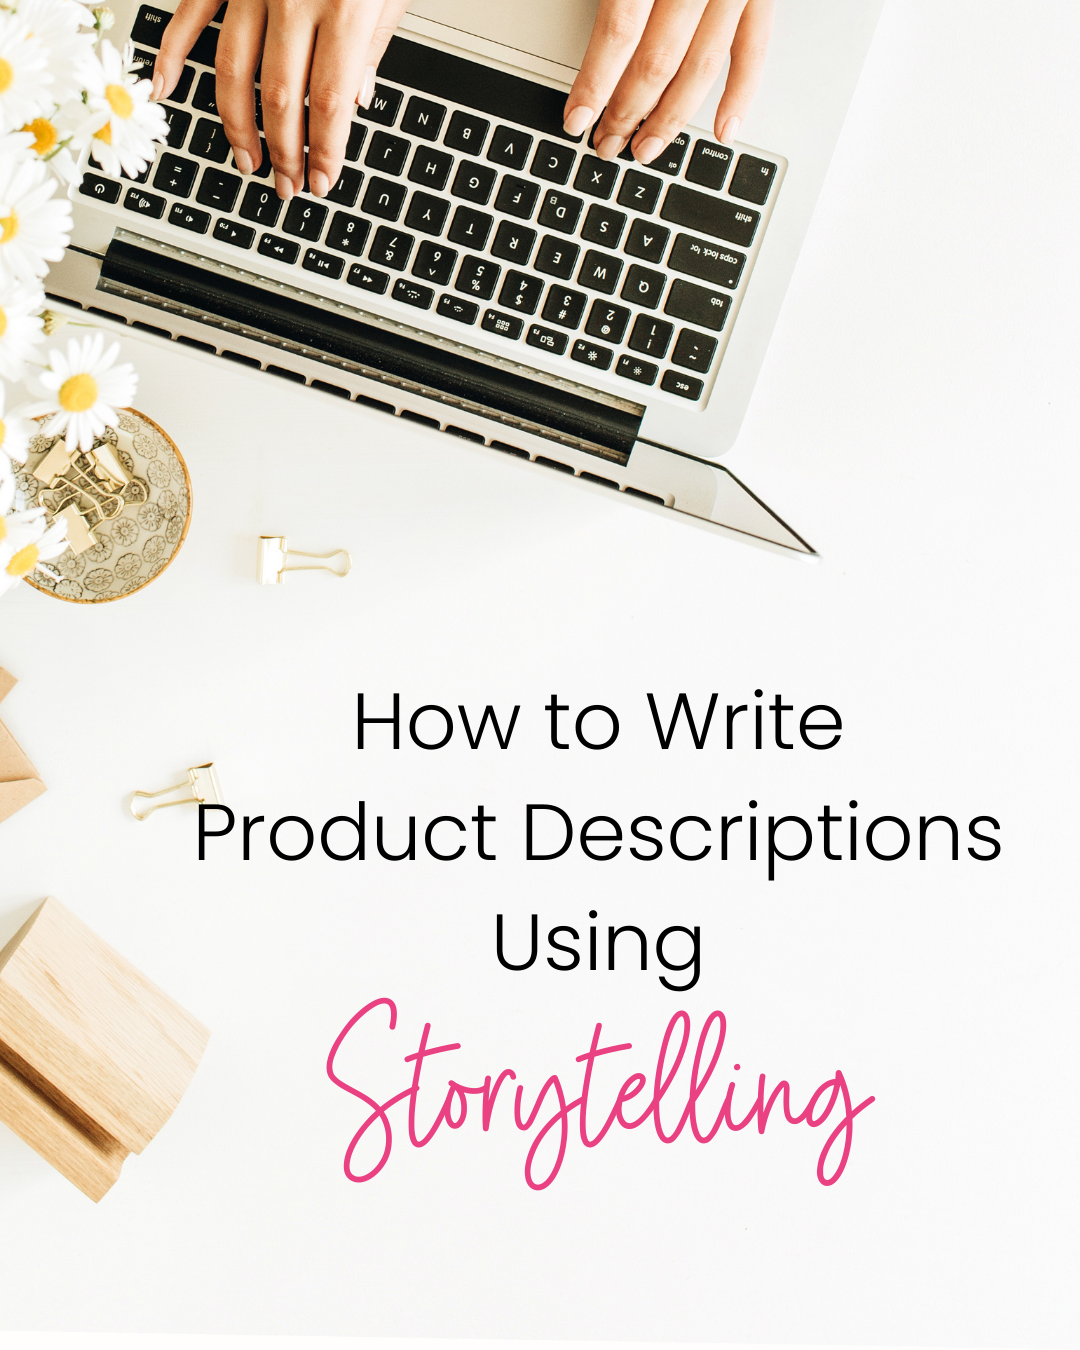 How to write product descriptions using storytelling laptop with hands typing on it and flowers on desktop